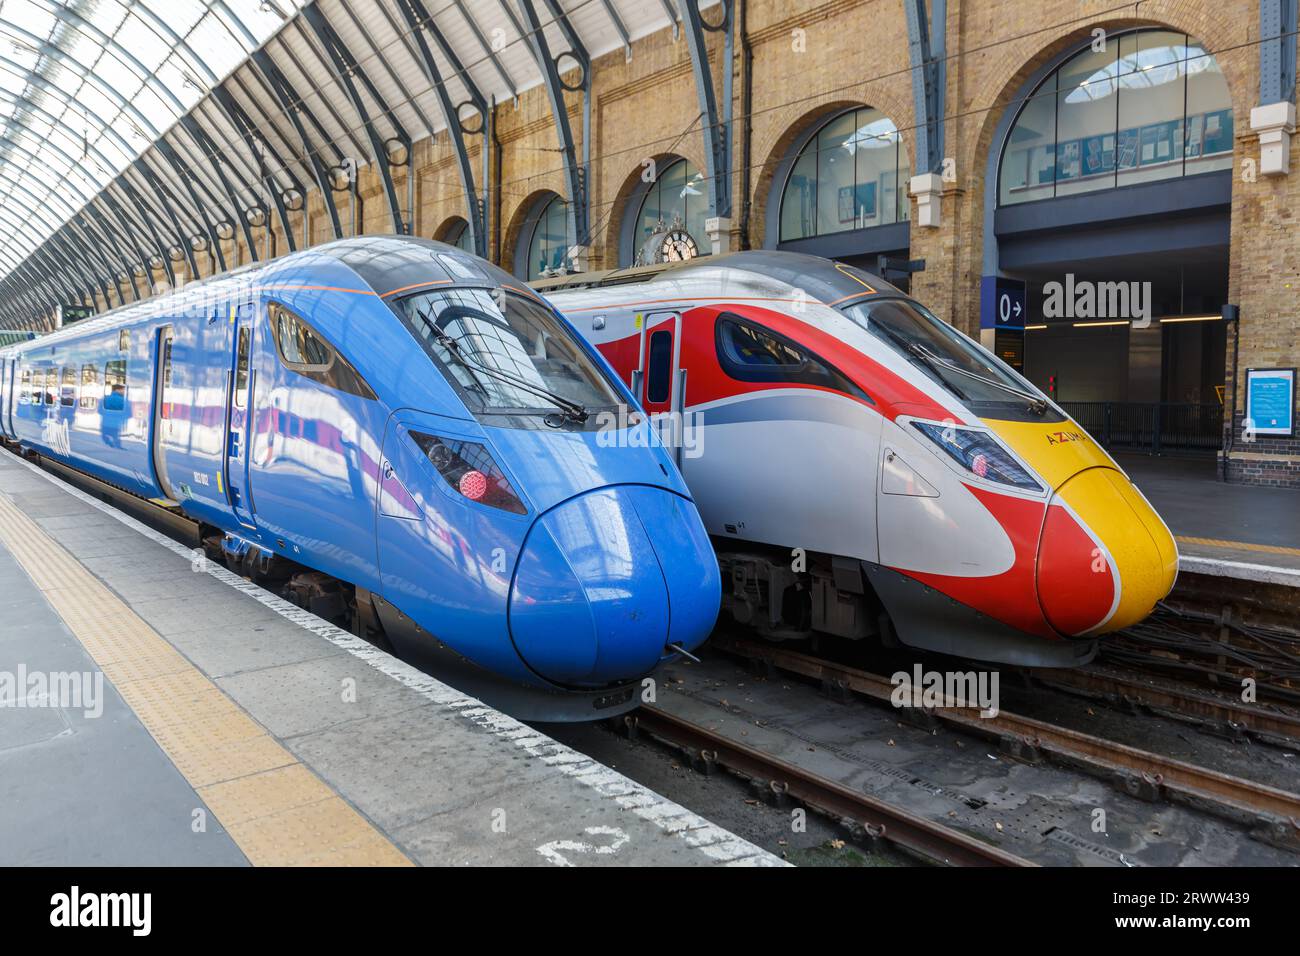 London, United Kingdom - April 29, 2023: Azuma high speed trains of London North Eastern Railway LNER and Lumo of FirstGroup at King's Cross train sta Stock Photo